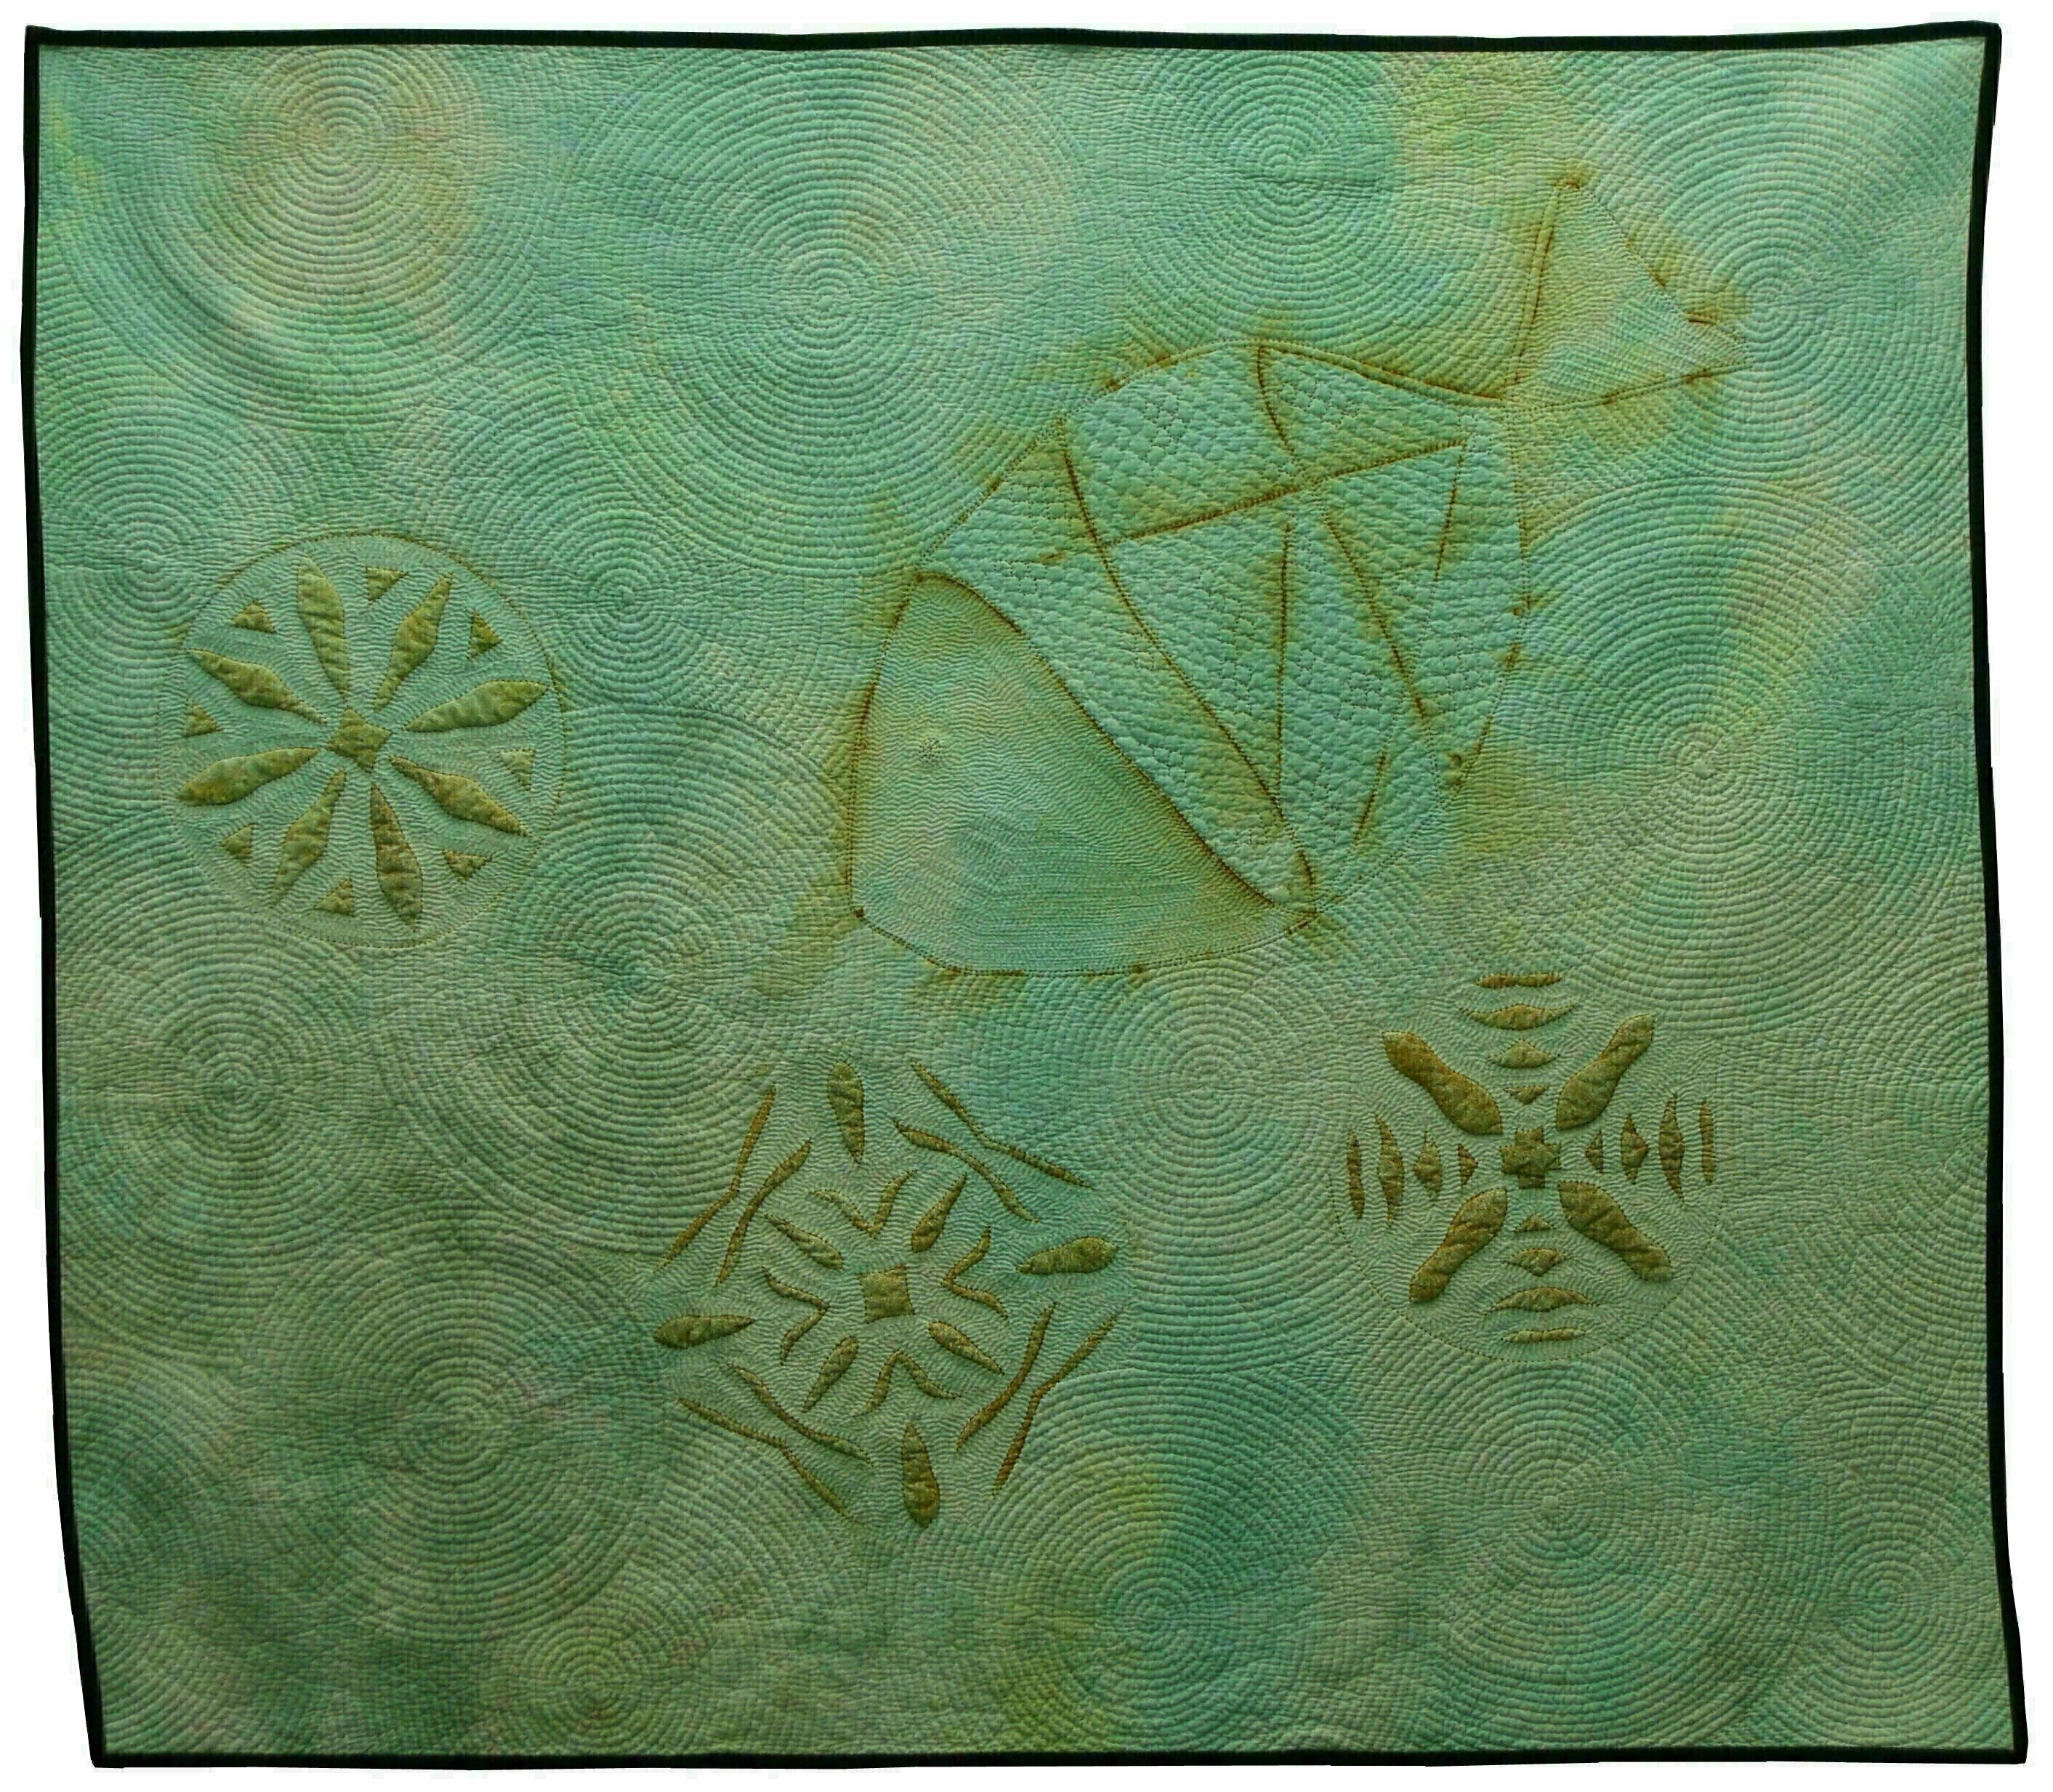 Jean Judd, 'Contaminated Water 5 Muta...', 2012, original Textile, 41.5 x 47.5  x 0.3 inches. Artwork description: 2307  This is piece is a continuation of the Contaminated Water series.  Rust pigmentation on hand dyed fabric sets the tone of the textile artwork.  The visual and physical texture created by the dense hand stitching used to create the overall design really makes the piece pop and ...